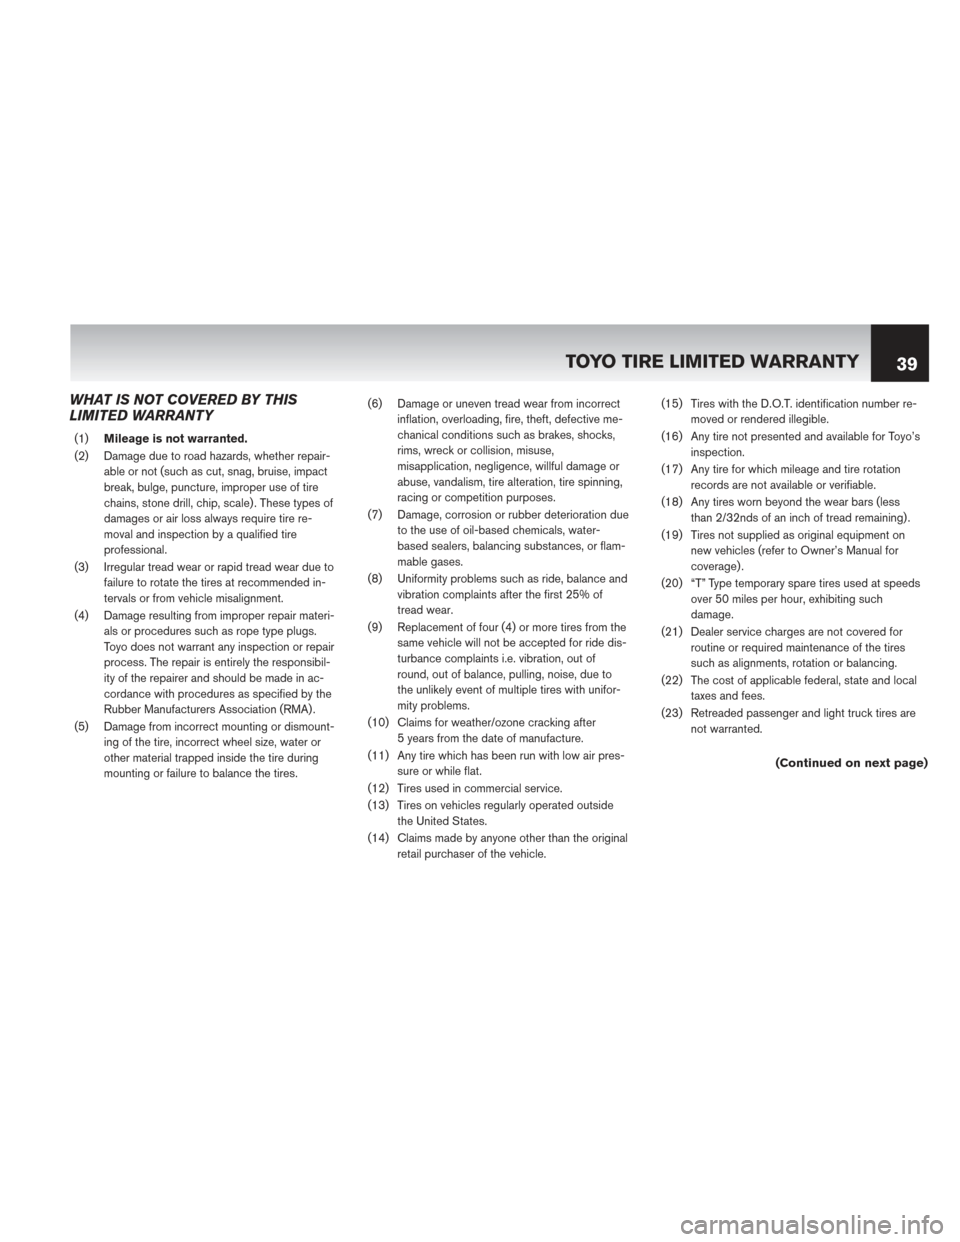 NISSAN MURANO HYBRID 2014 2.G Warranty Booklet WHAT IS NOT COVERED BY THIS
LIMITED WARRANTY
(1)Mileage is not warranted.
(2) Damage due to road hazards, whether repair- able or not (such as cut, snag, bruise, impact
break, bulge, puncture, imprope